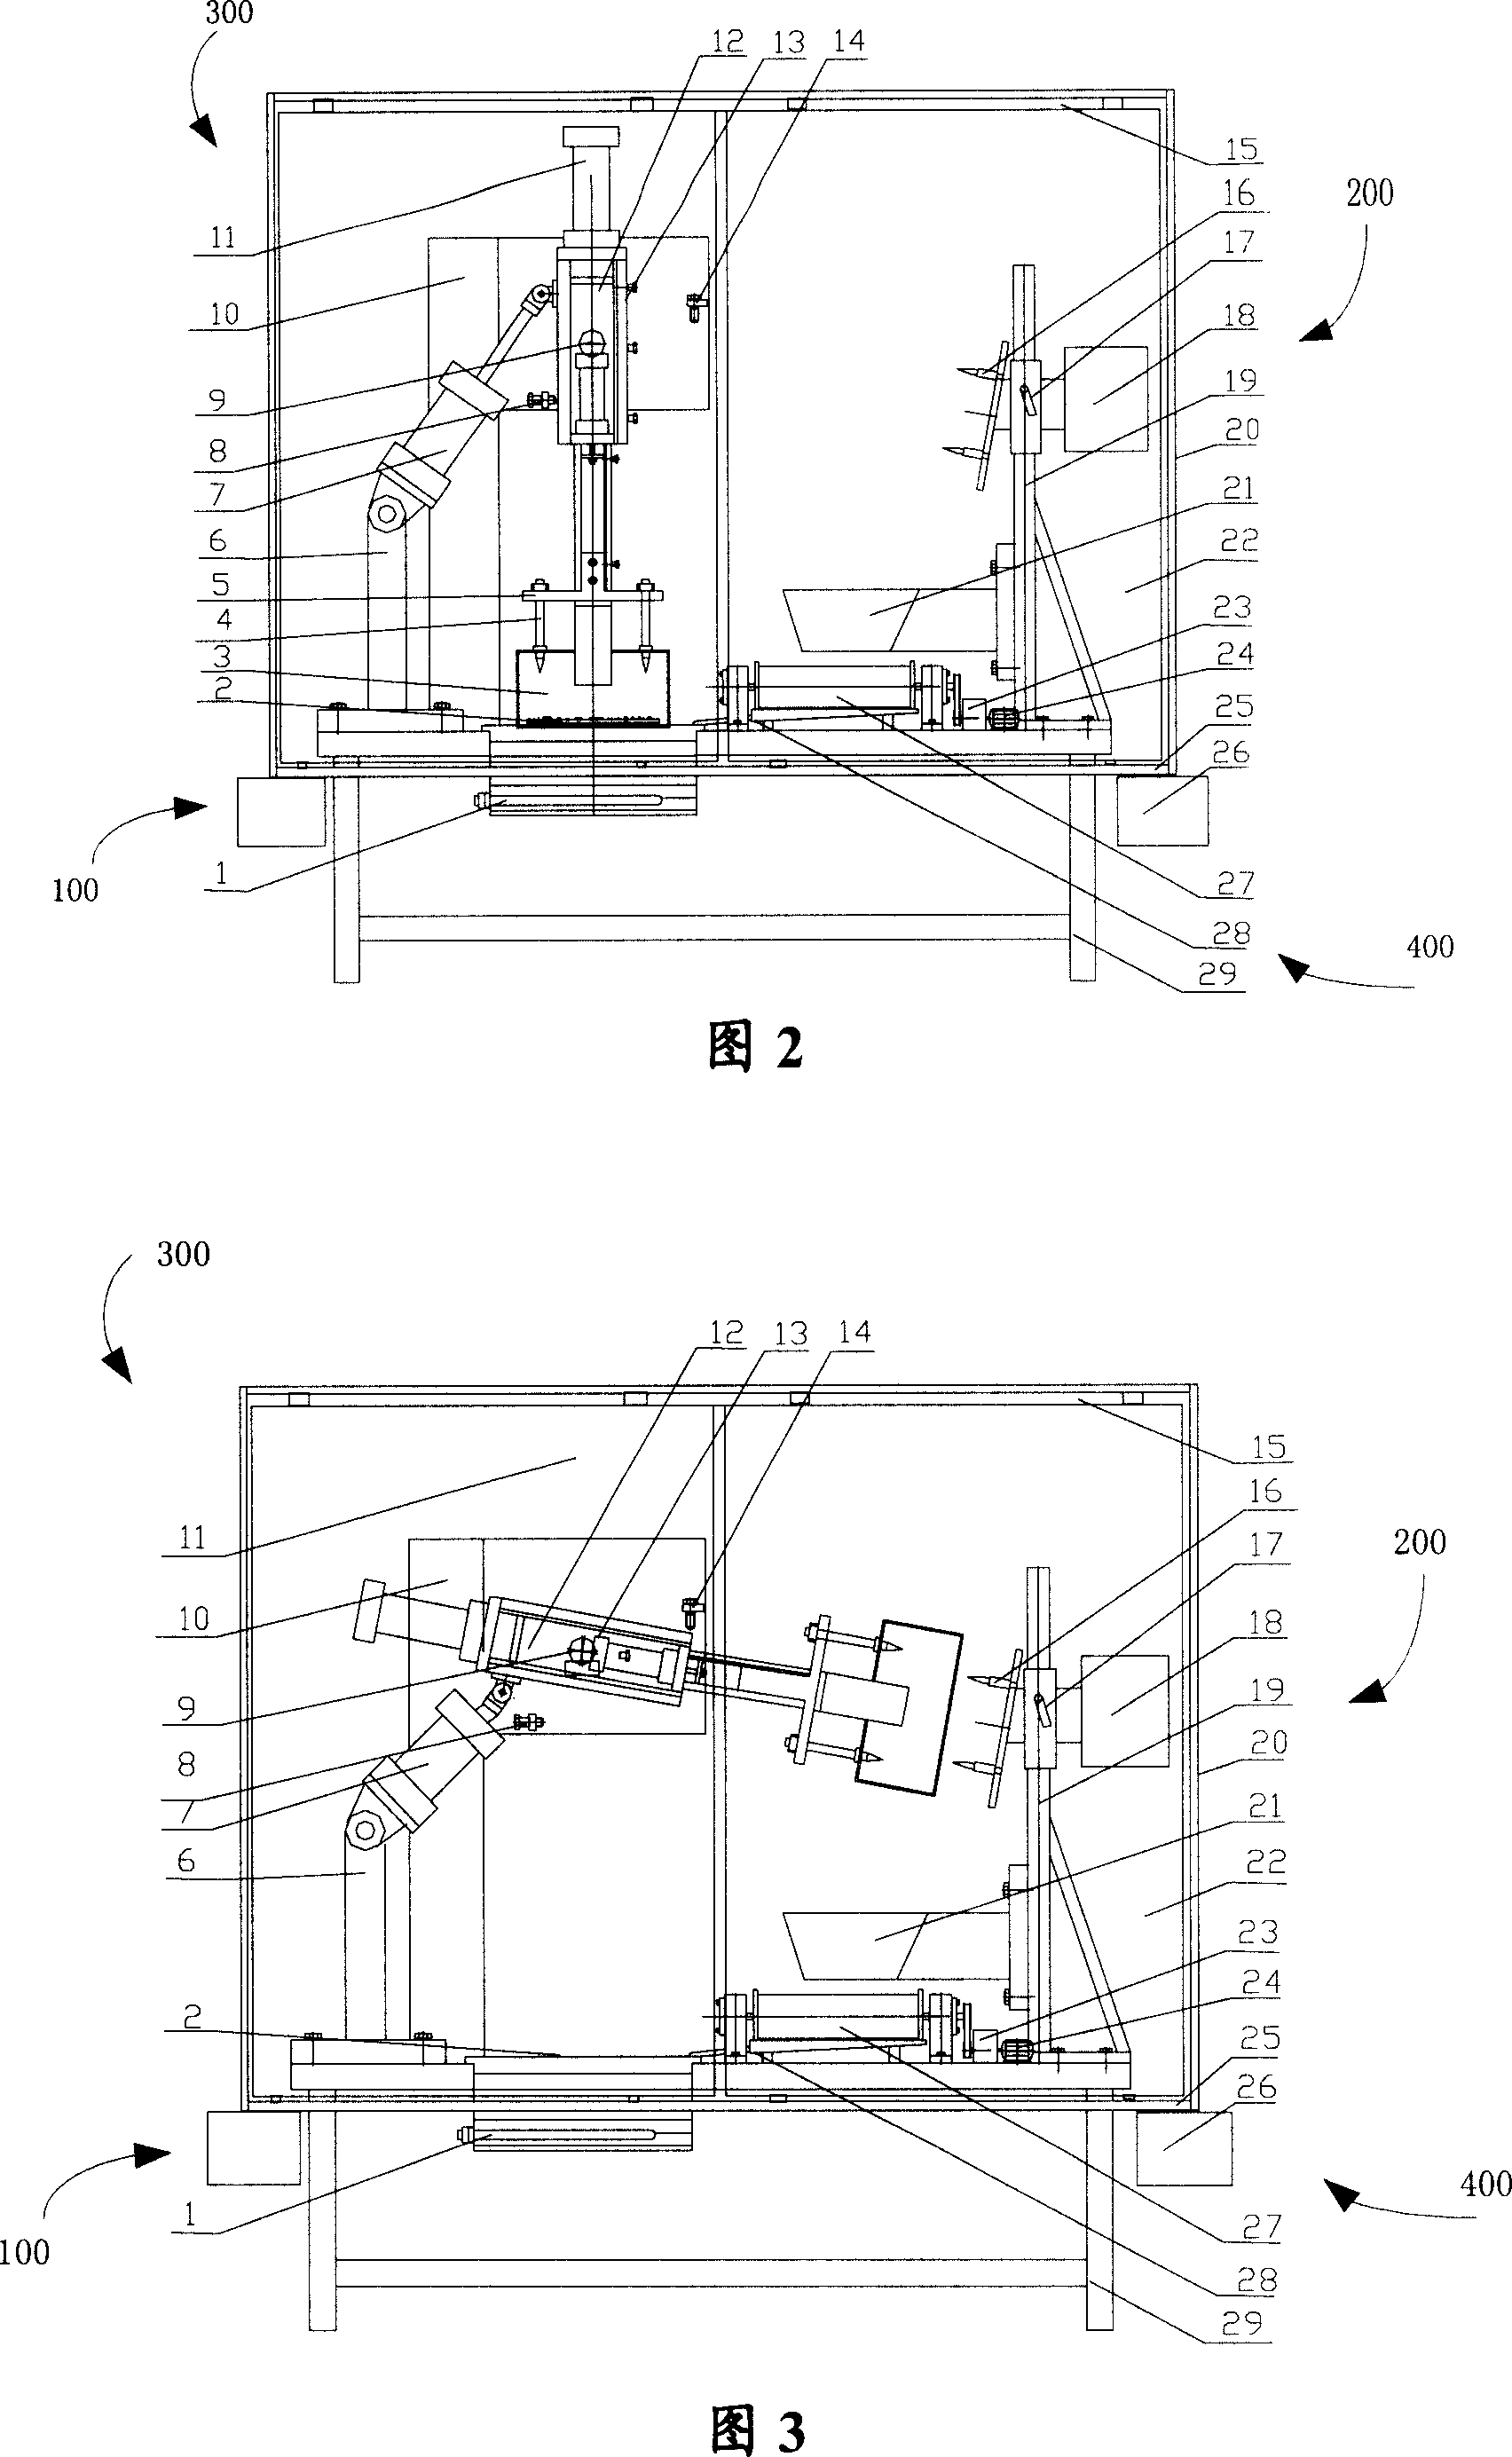 Circuit board component thermal disassembling equipment and method